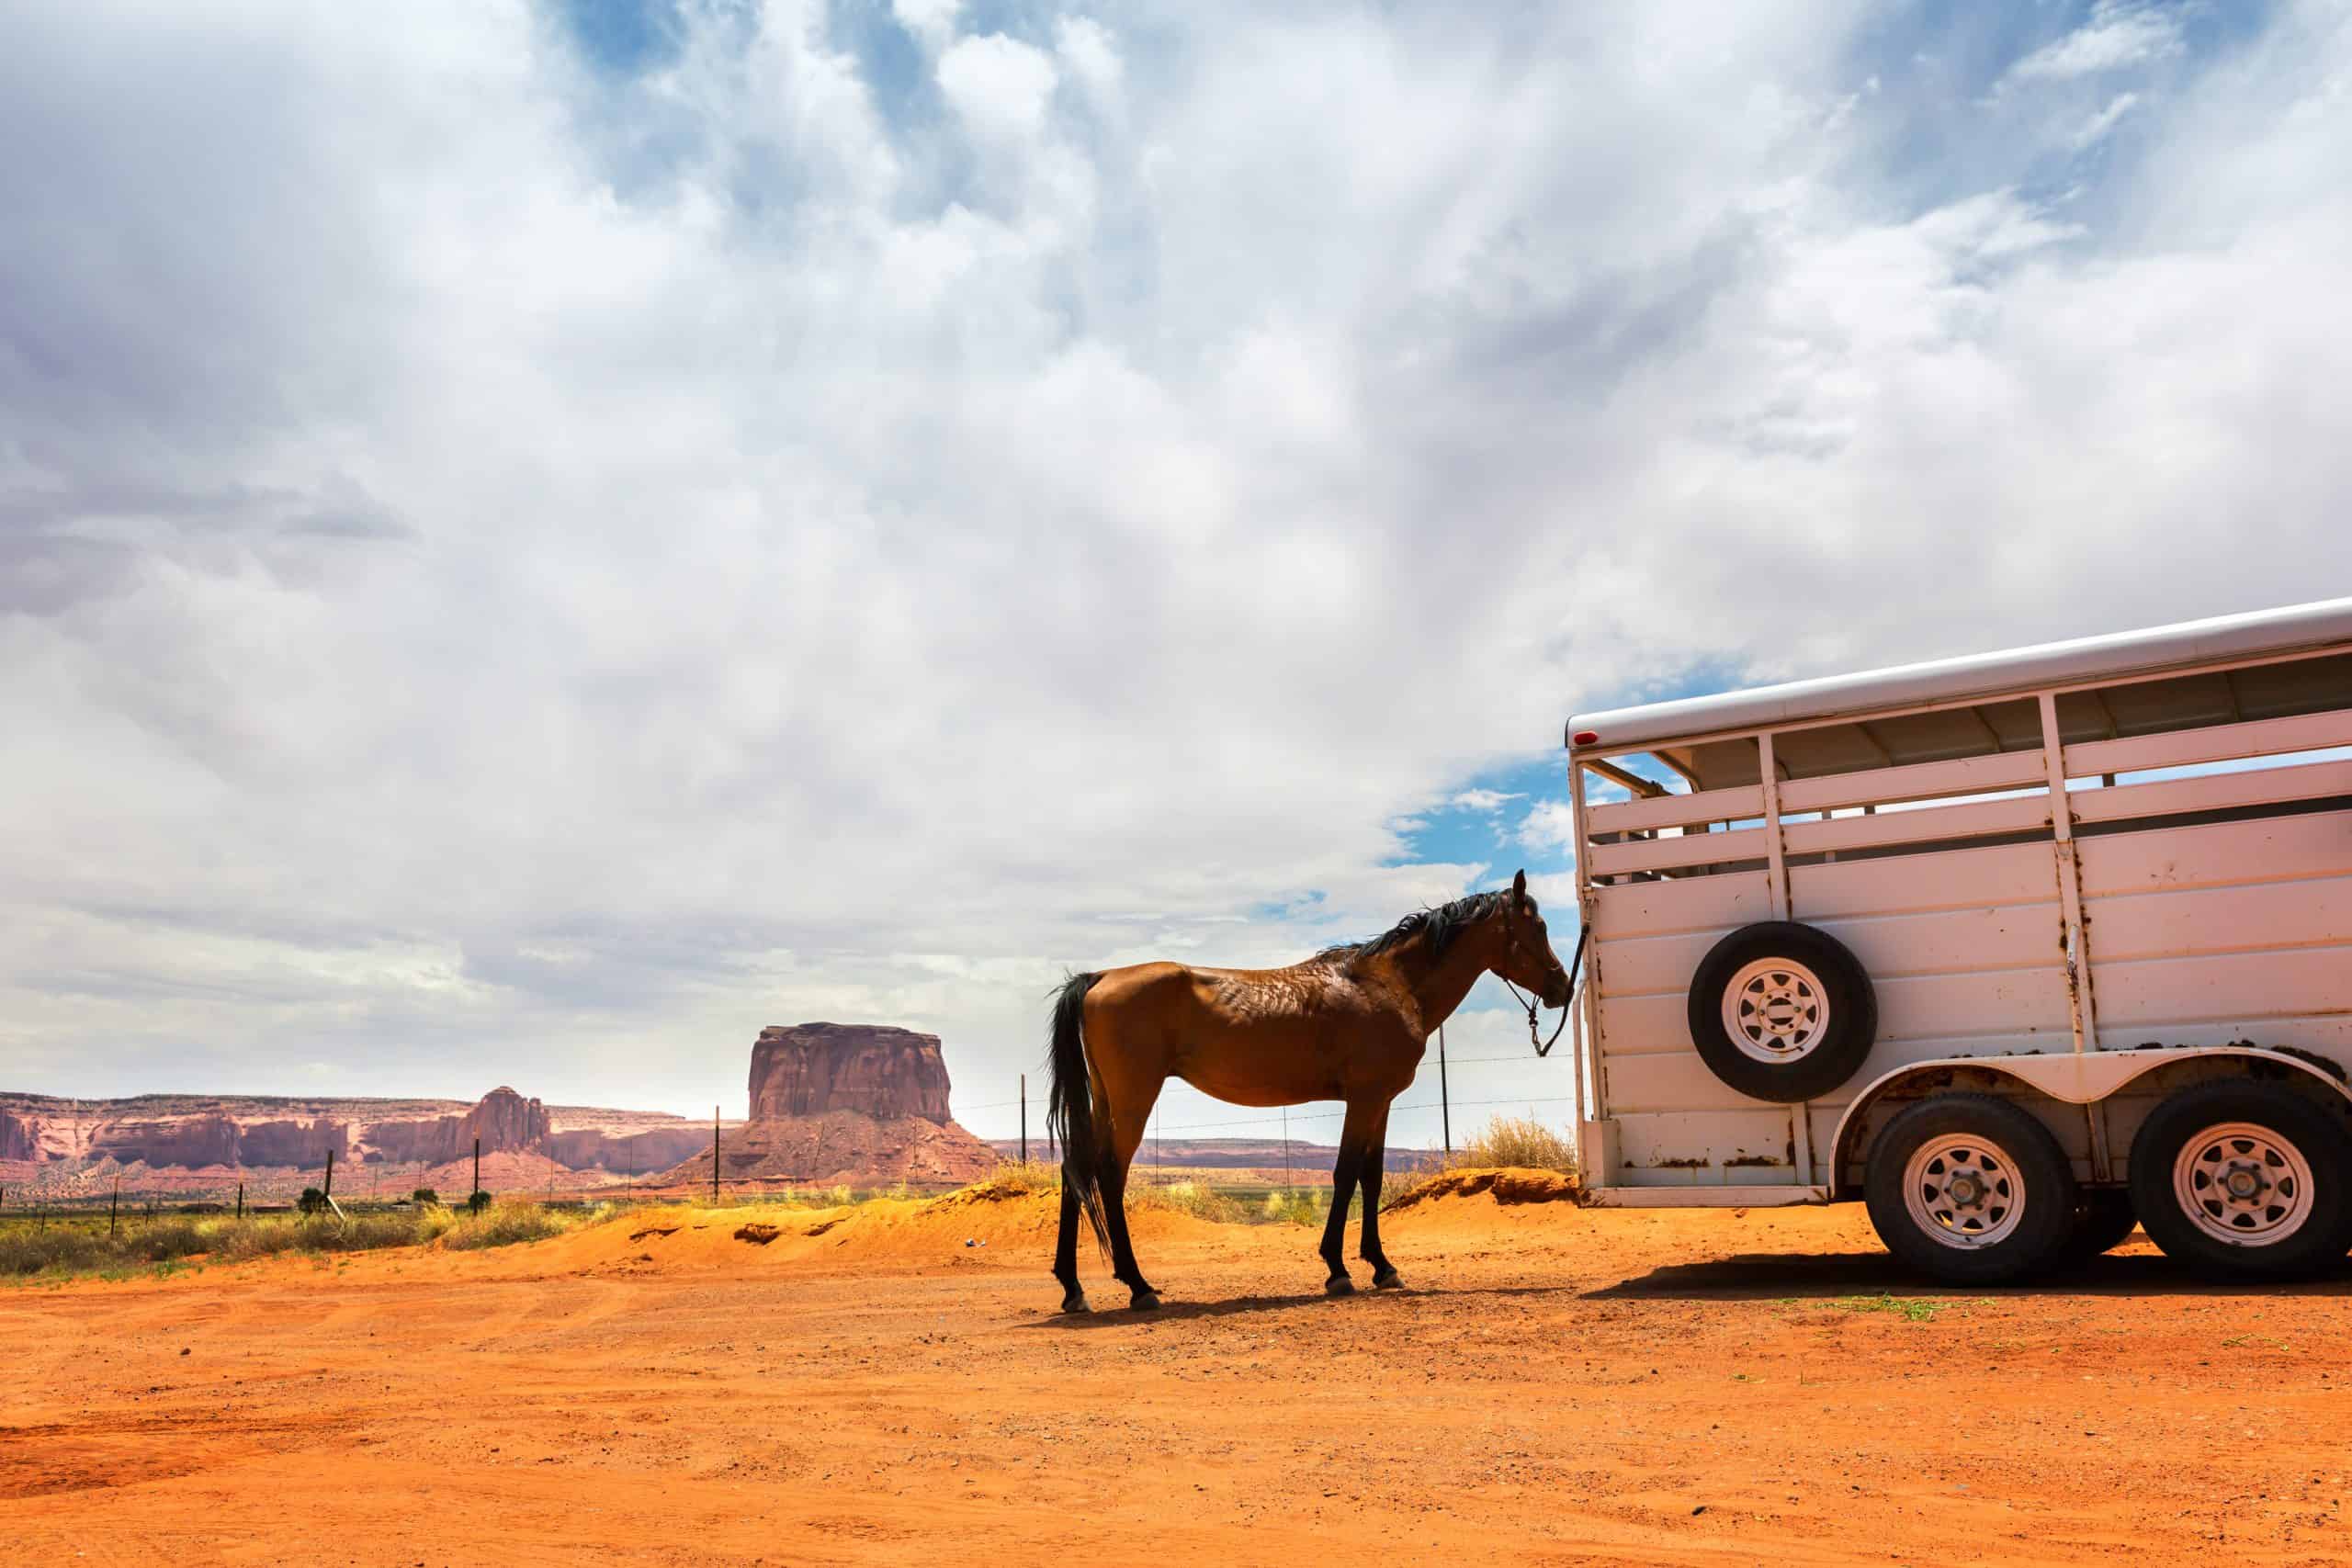 Horse near the trailer. Monument valley travaling